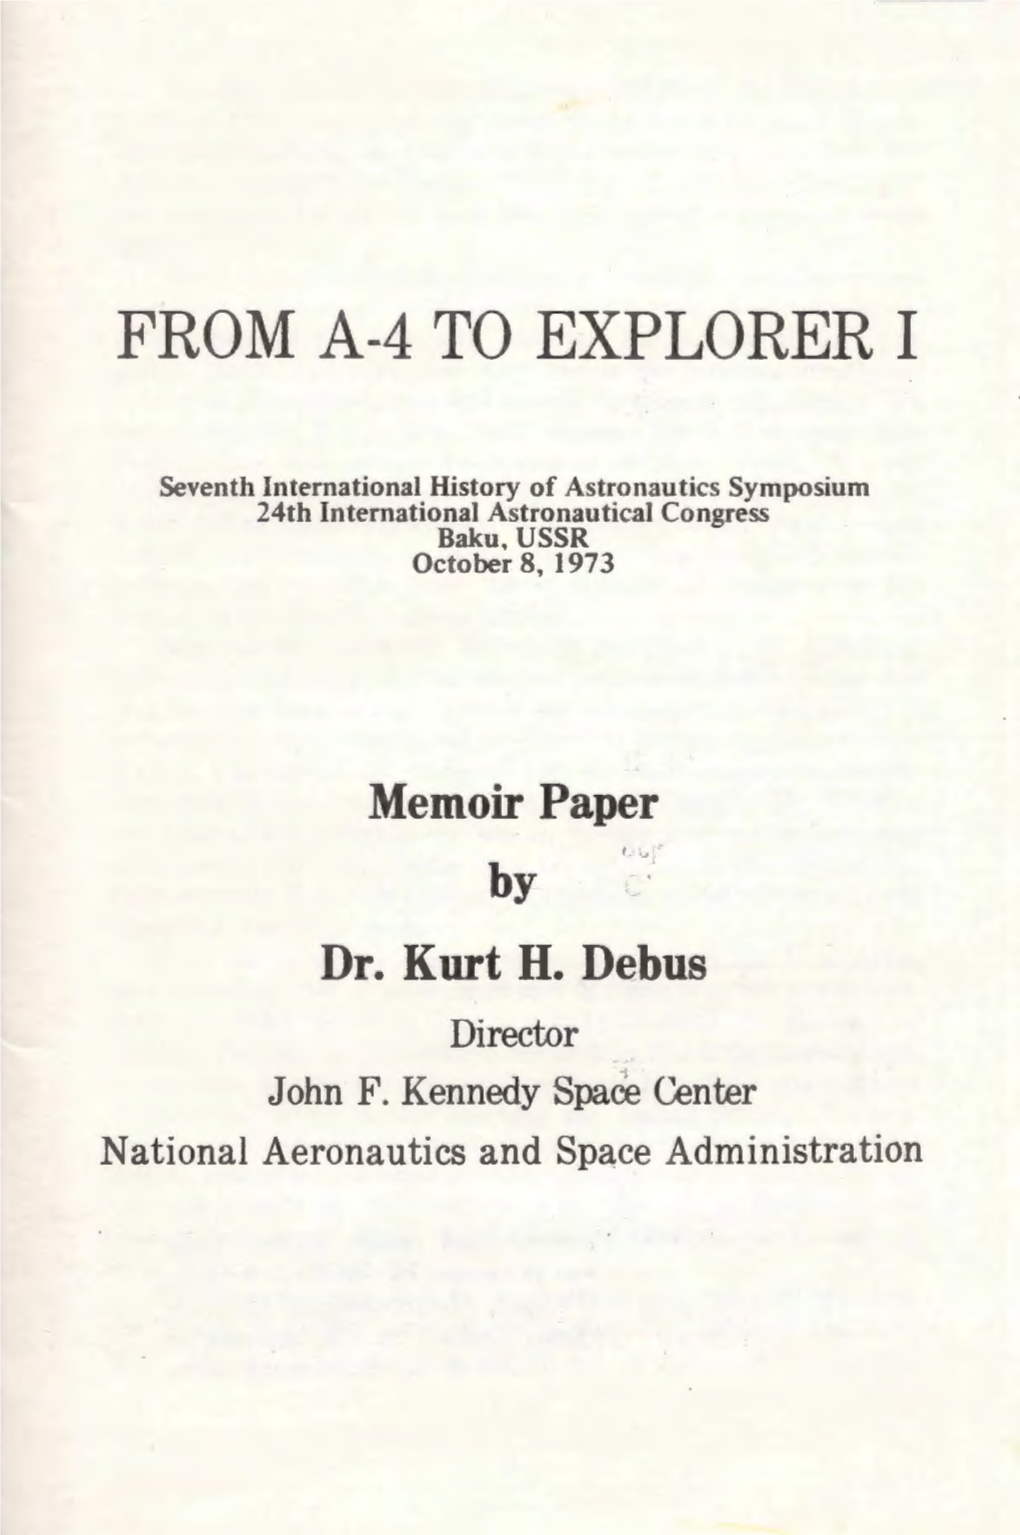 “From A-4 to Explorer 1” Dr. Kurt H. Debus